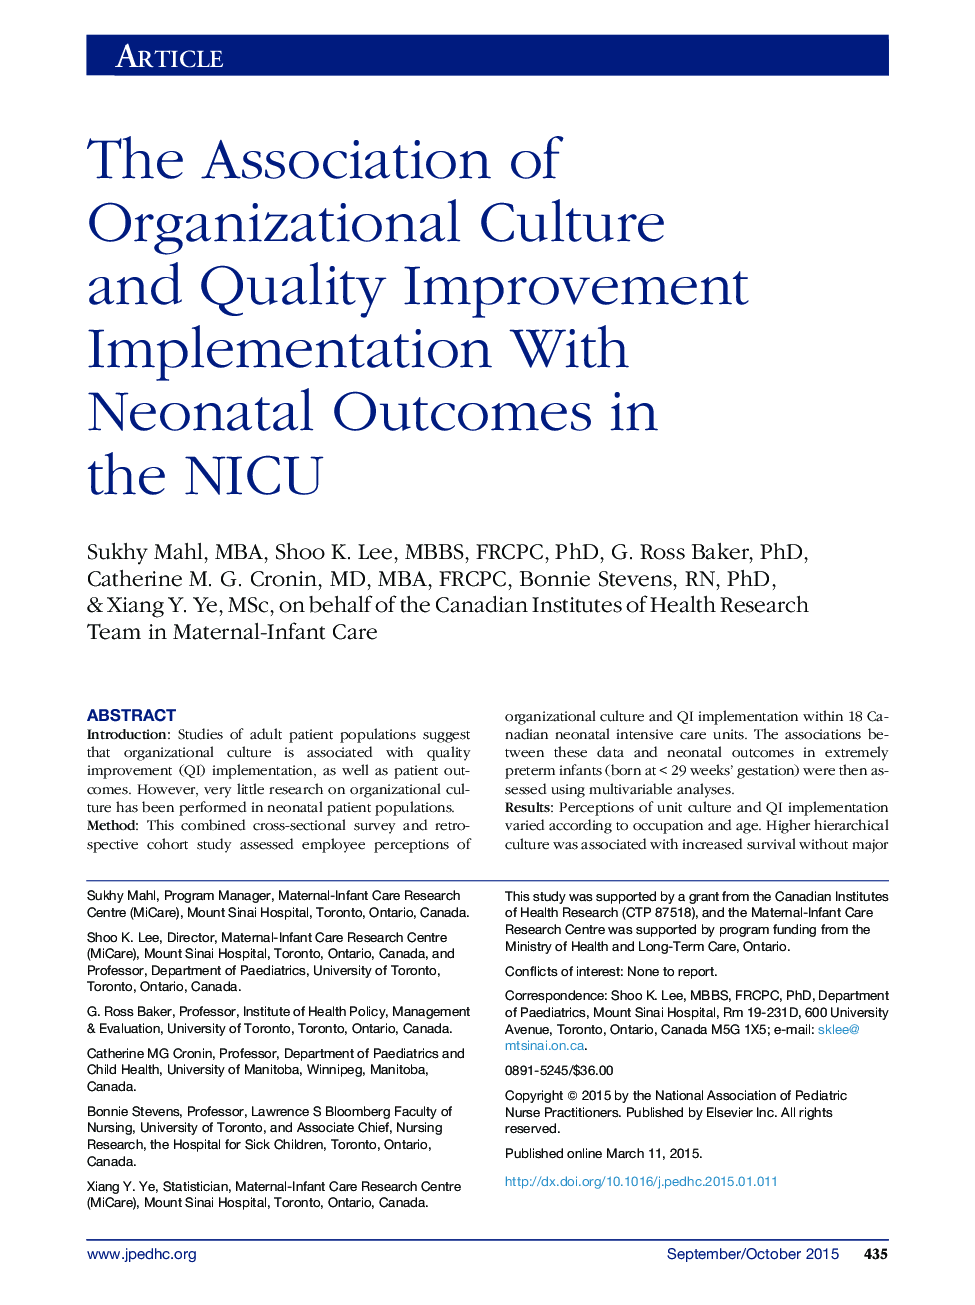 The Association of Organizational Culture and Quality Improvement Implementation With Neonatal Outcomes in the NICU 